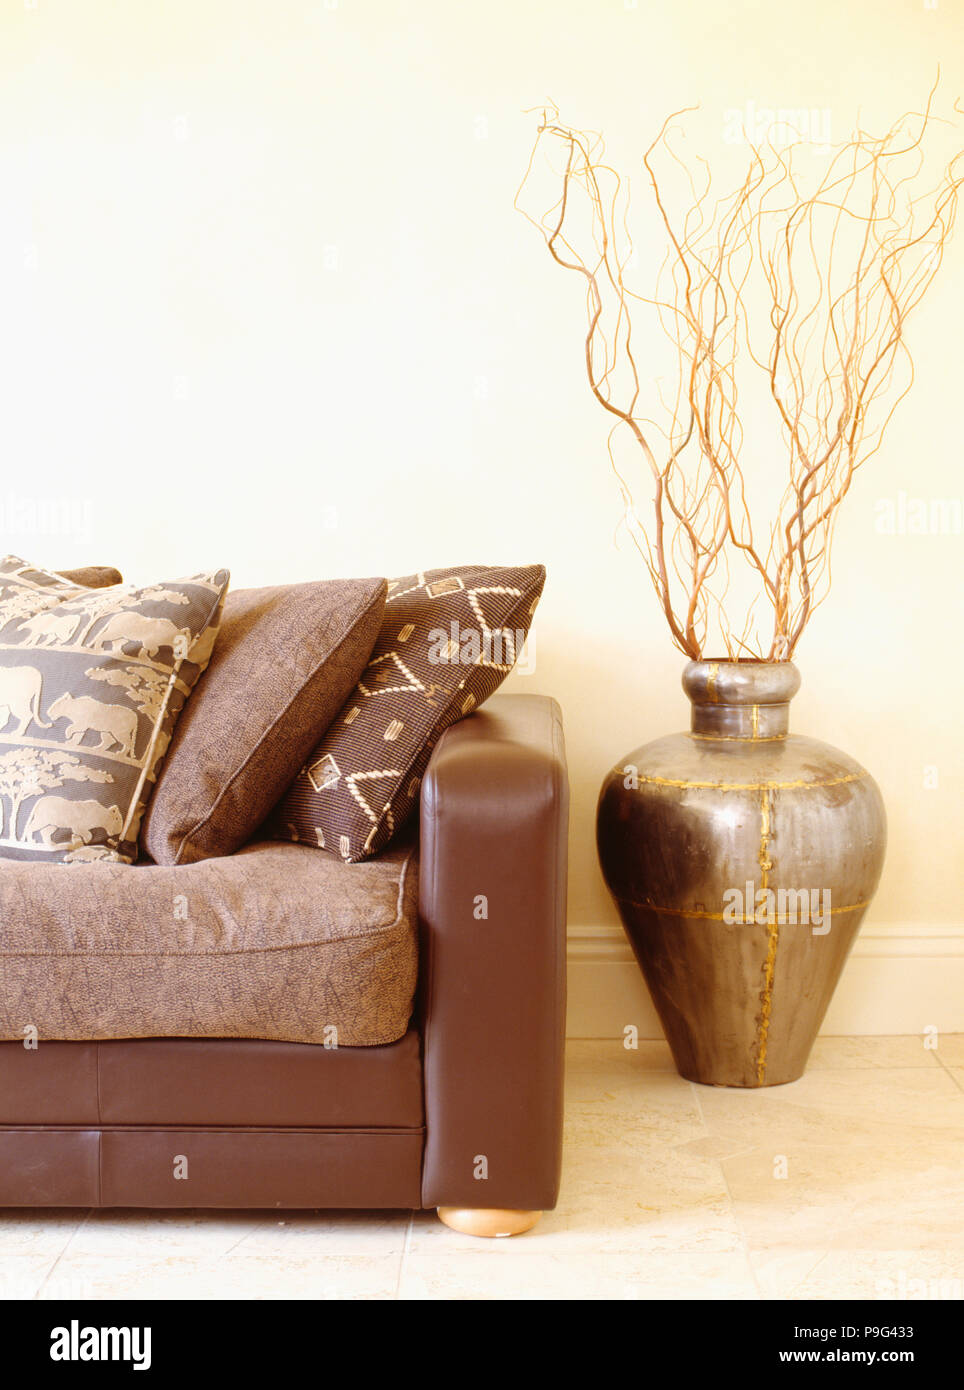 Ethnic-patterned cushions on brown leather sofa beside branches in Moroccan pot Stock Photo